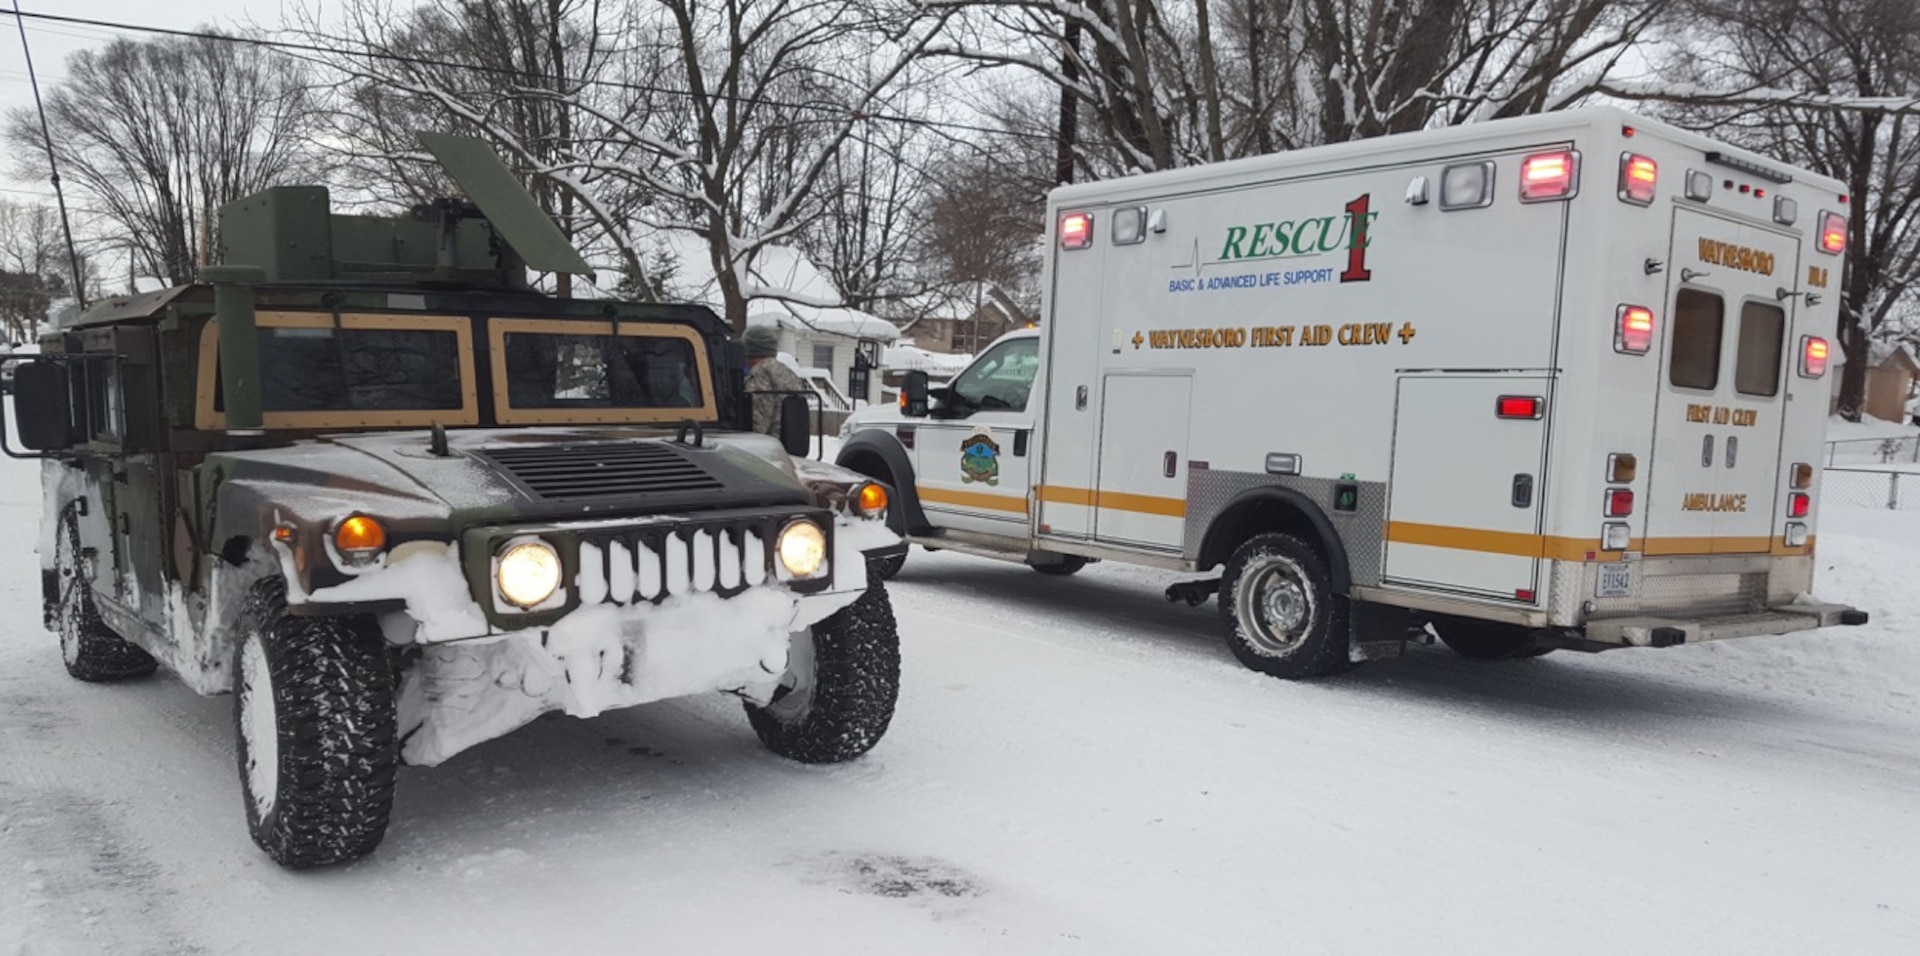 Virginia National Guard Soldiers assigned to the Pulaski-based Company D, 1st Battalion, 116th Infantry, 116th Infantry Brigade Combat Team assist the Waynesboro First Aid Crew with a rescue call Jan. 23, 2016, near Waynesboro, Virginia. The first aid crew was unable to reach the location of the call with their ambulance, so the Soldiers drove them to the residence, cleared them a path in the snow, then transported the patient back to the ambulance for evacuation. 